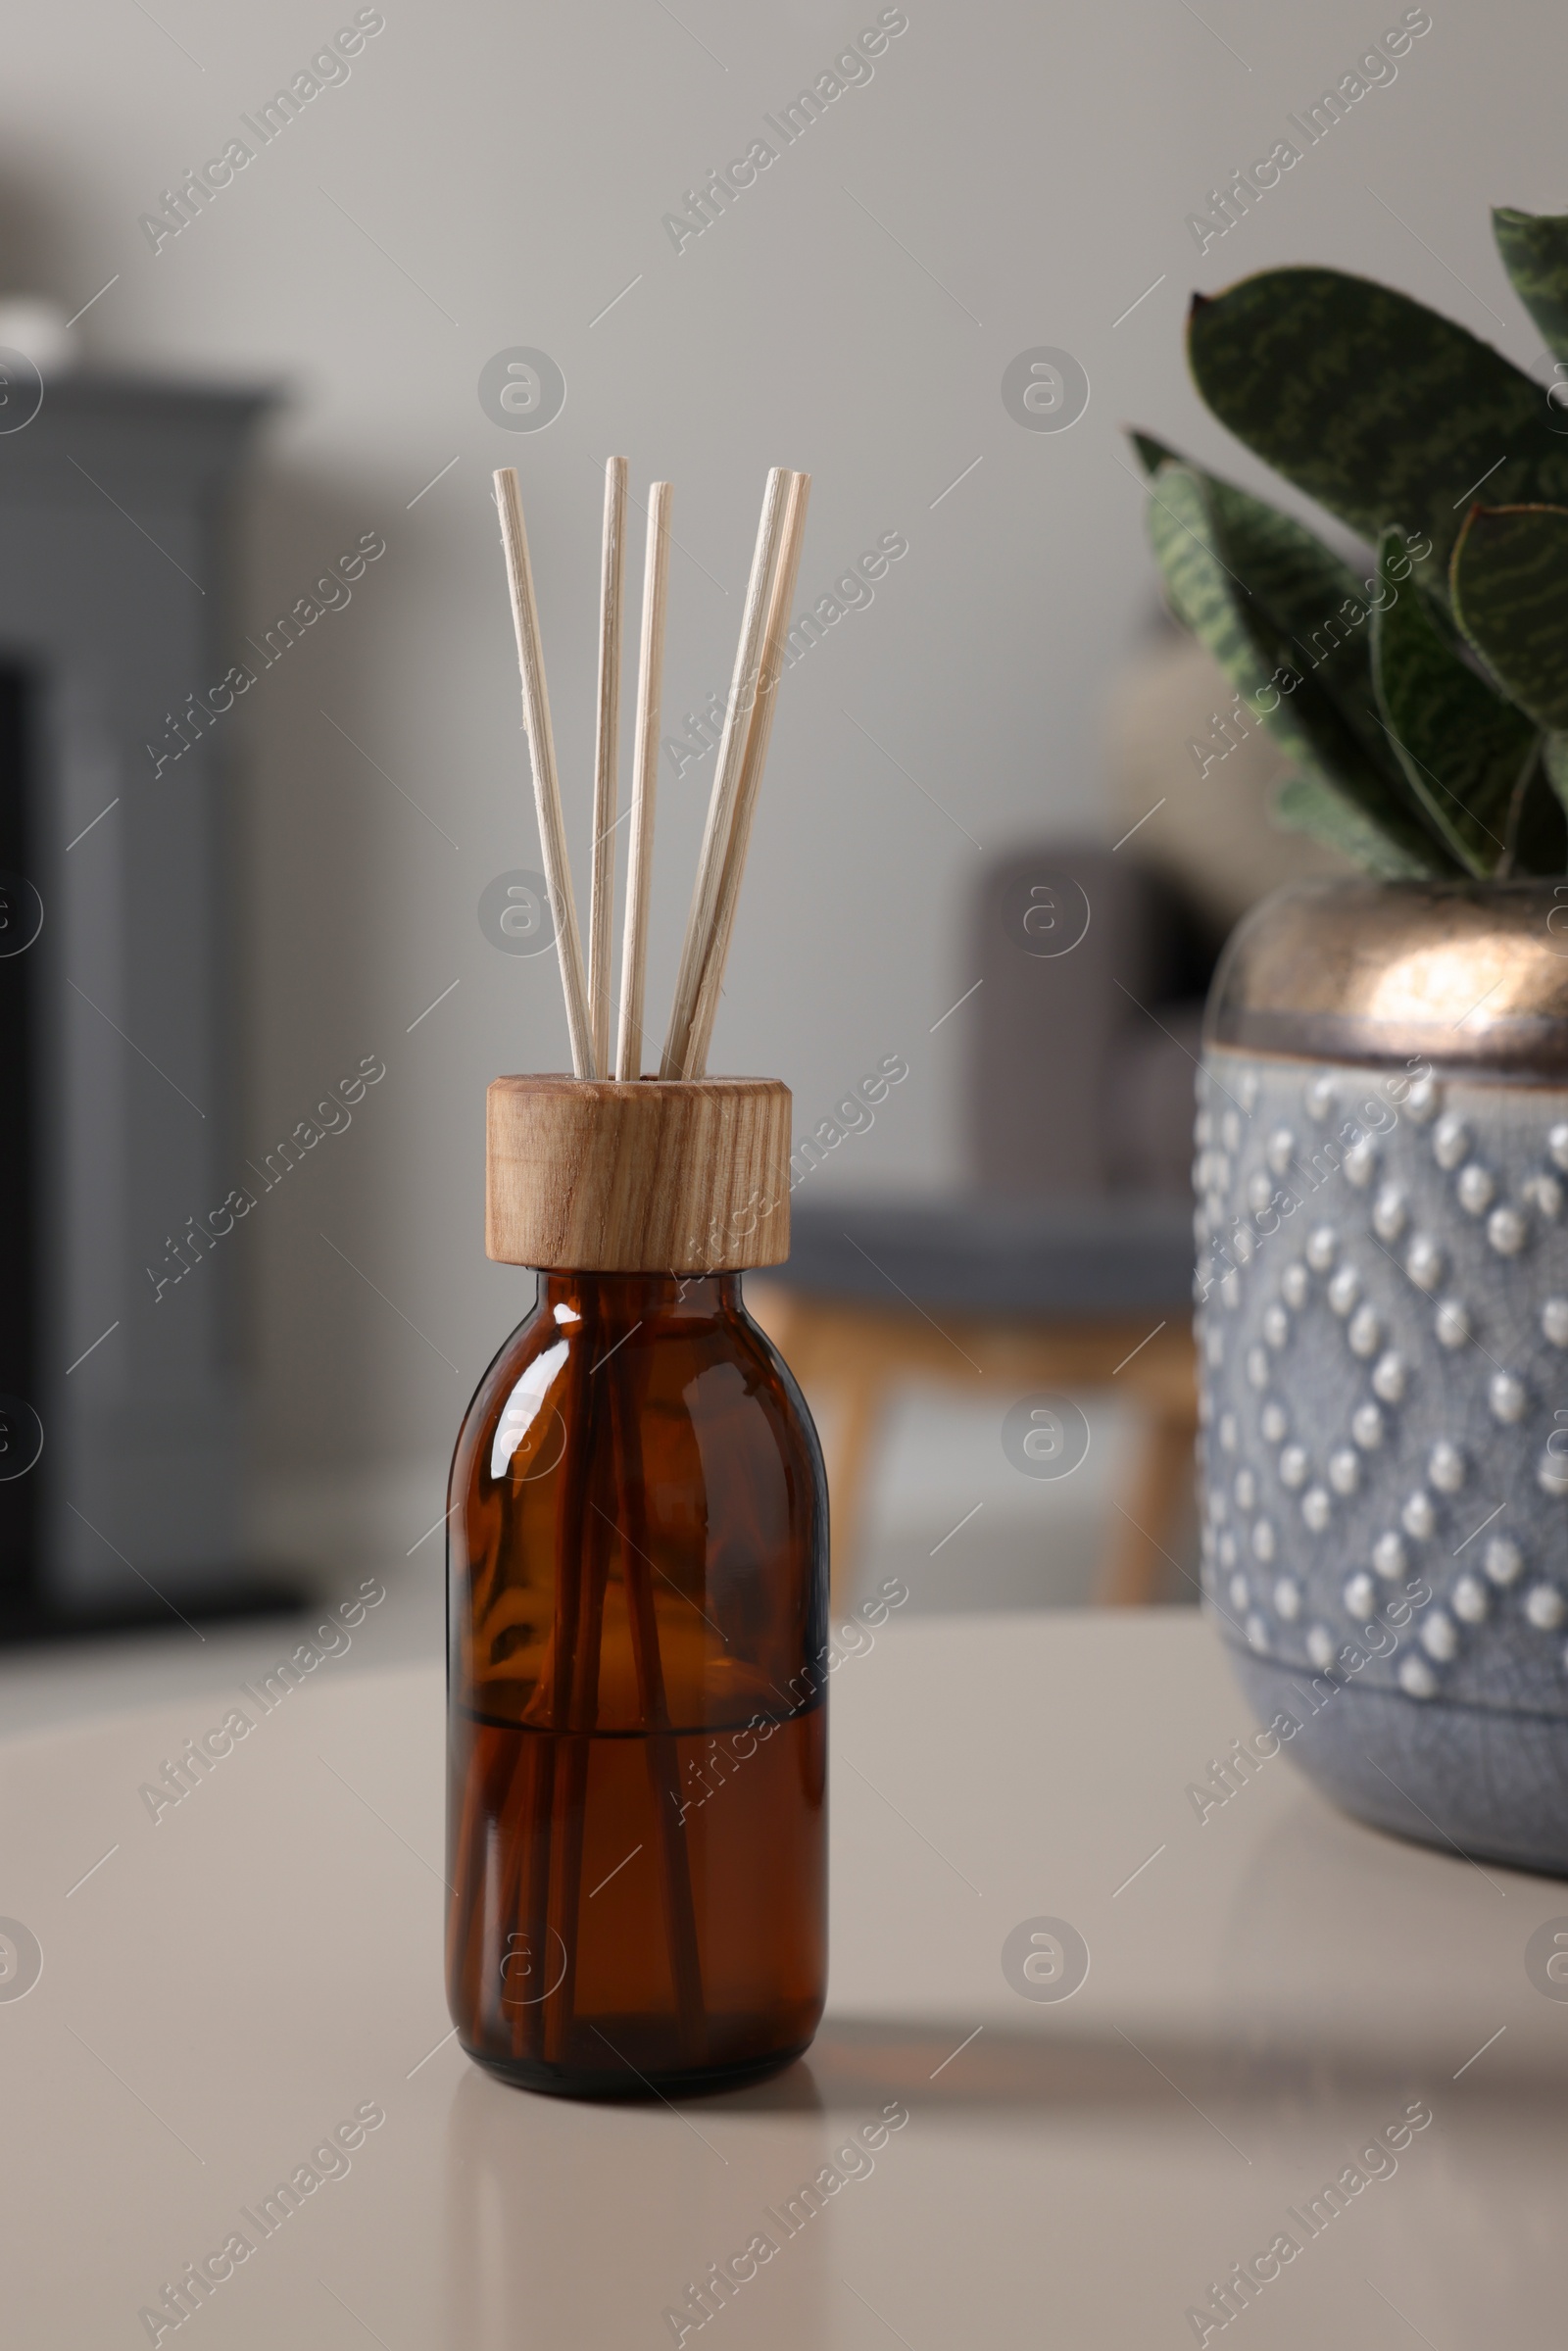 Photo of Aromatic reed air freshener near houseplant on light table indoors